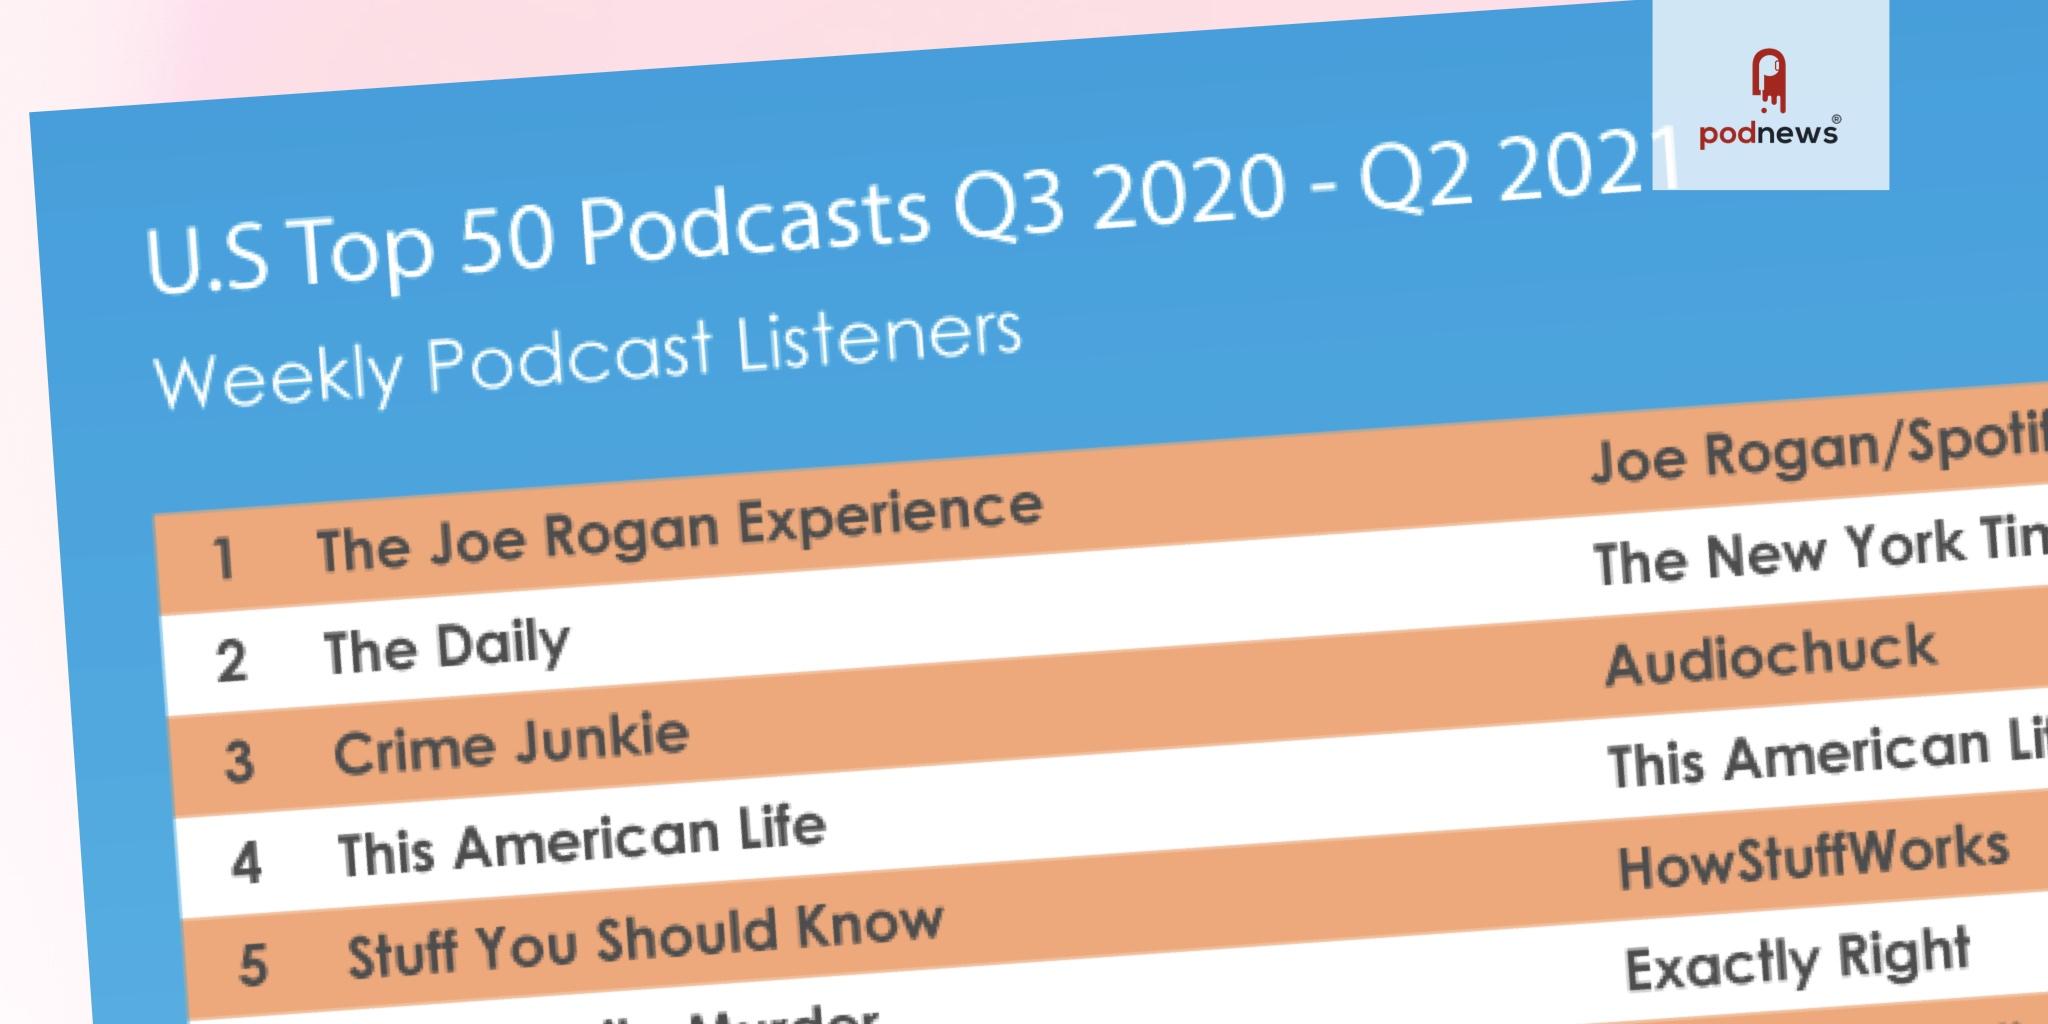 byrde Tap teori Edison Research Announces Top 50 U.S. Podcasts by Audience Size for Q2 2021